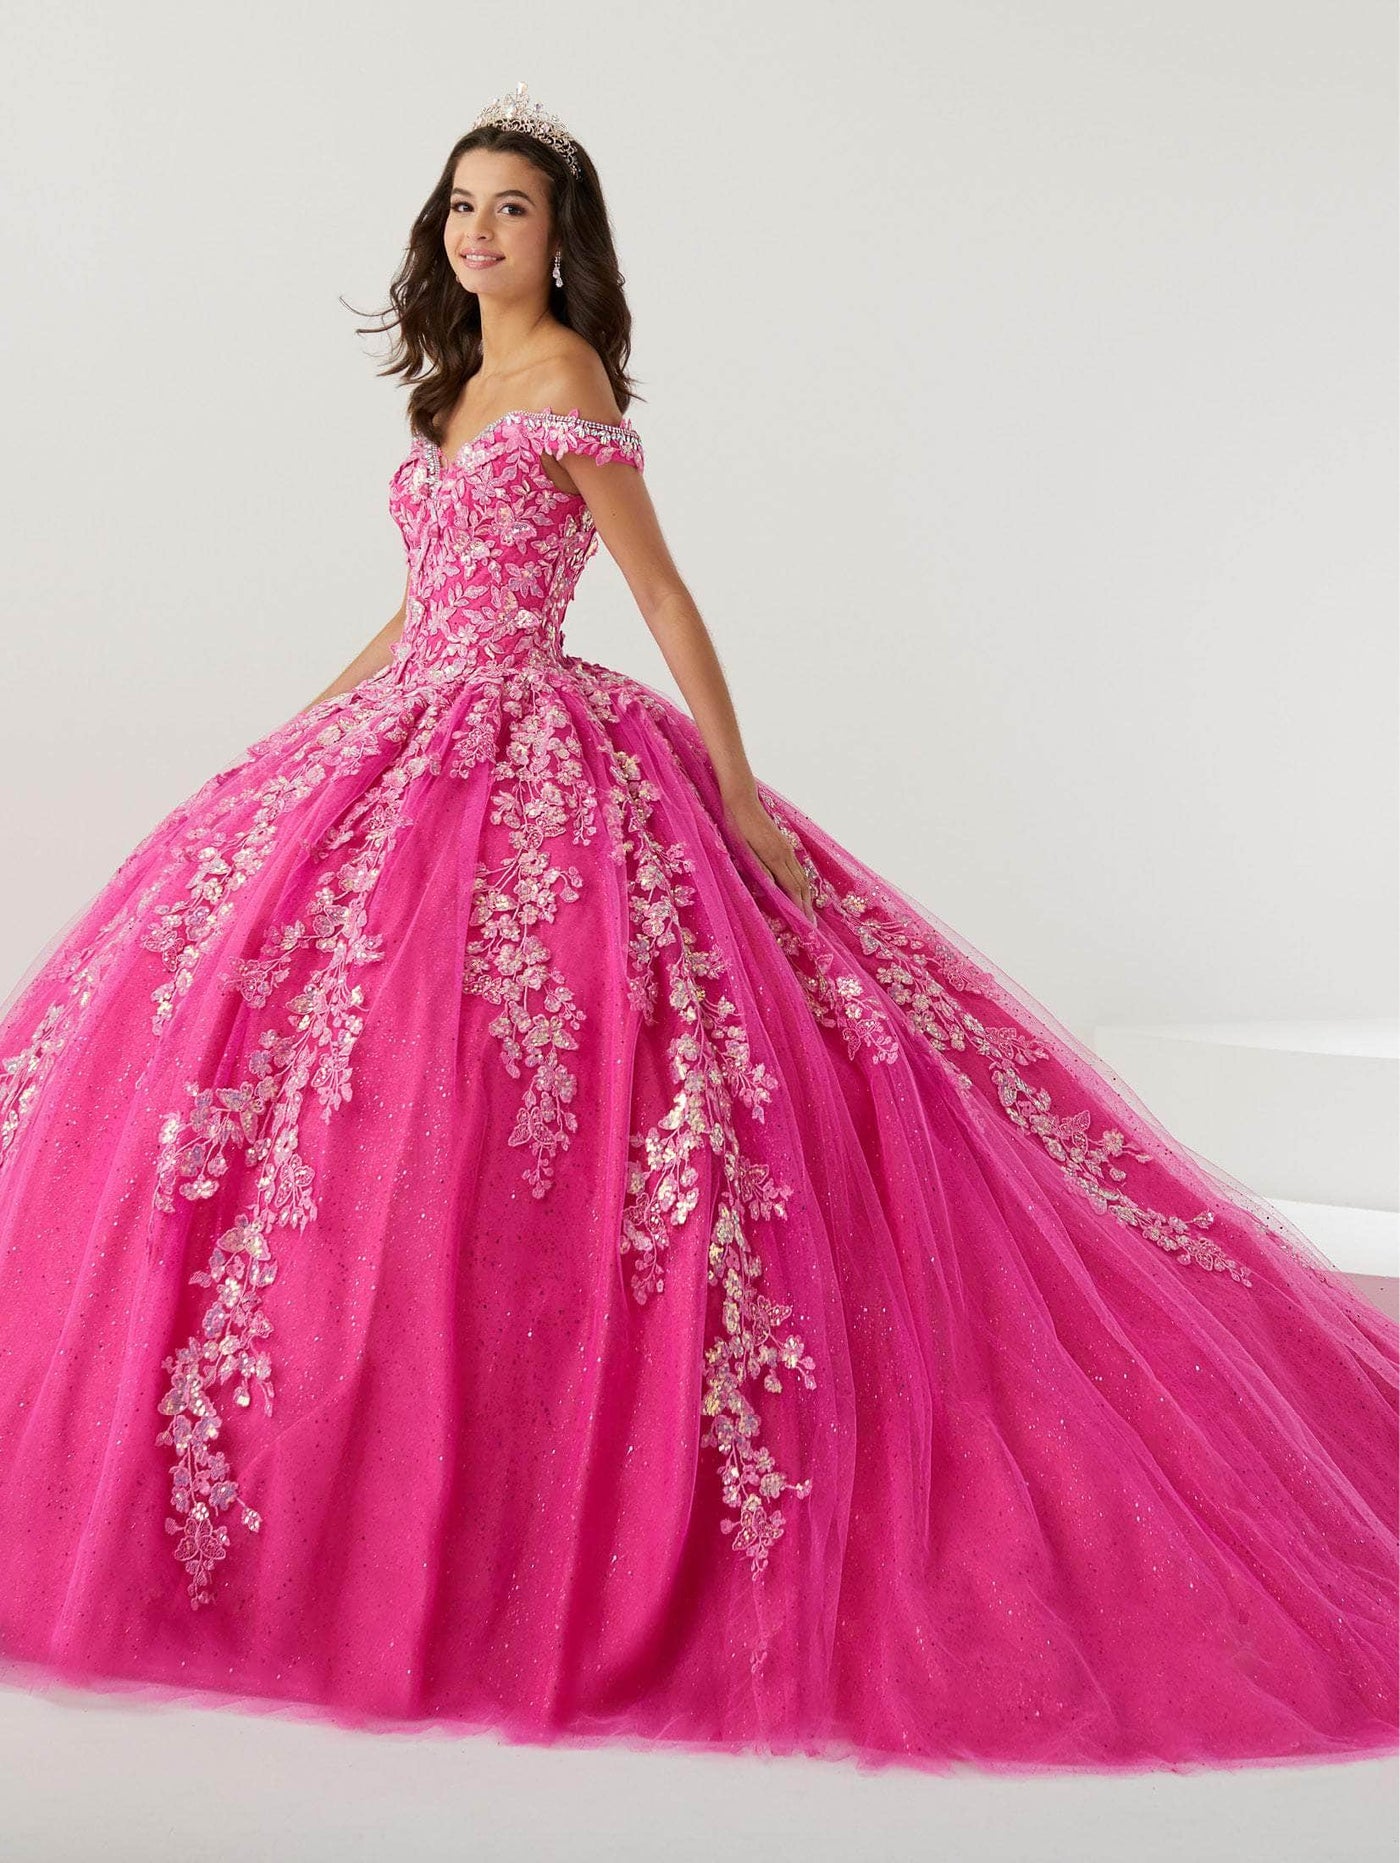 Fiesta Gowns 56471 - Intricately Embellished Voluminous Dress Special Occasion Dress